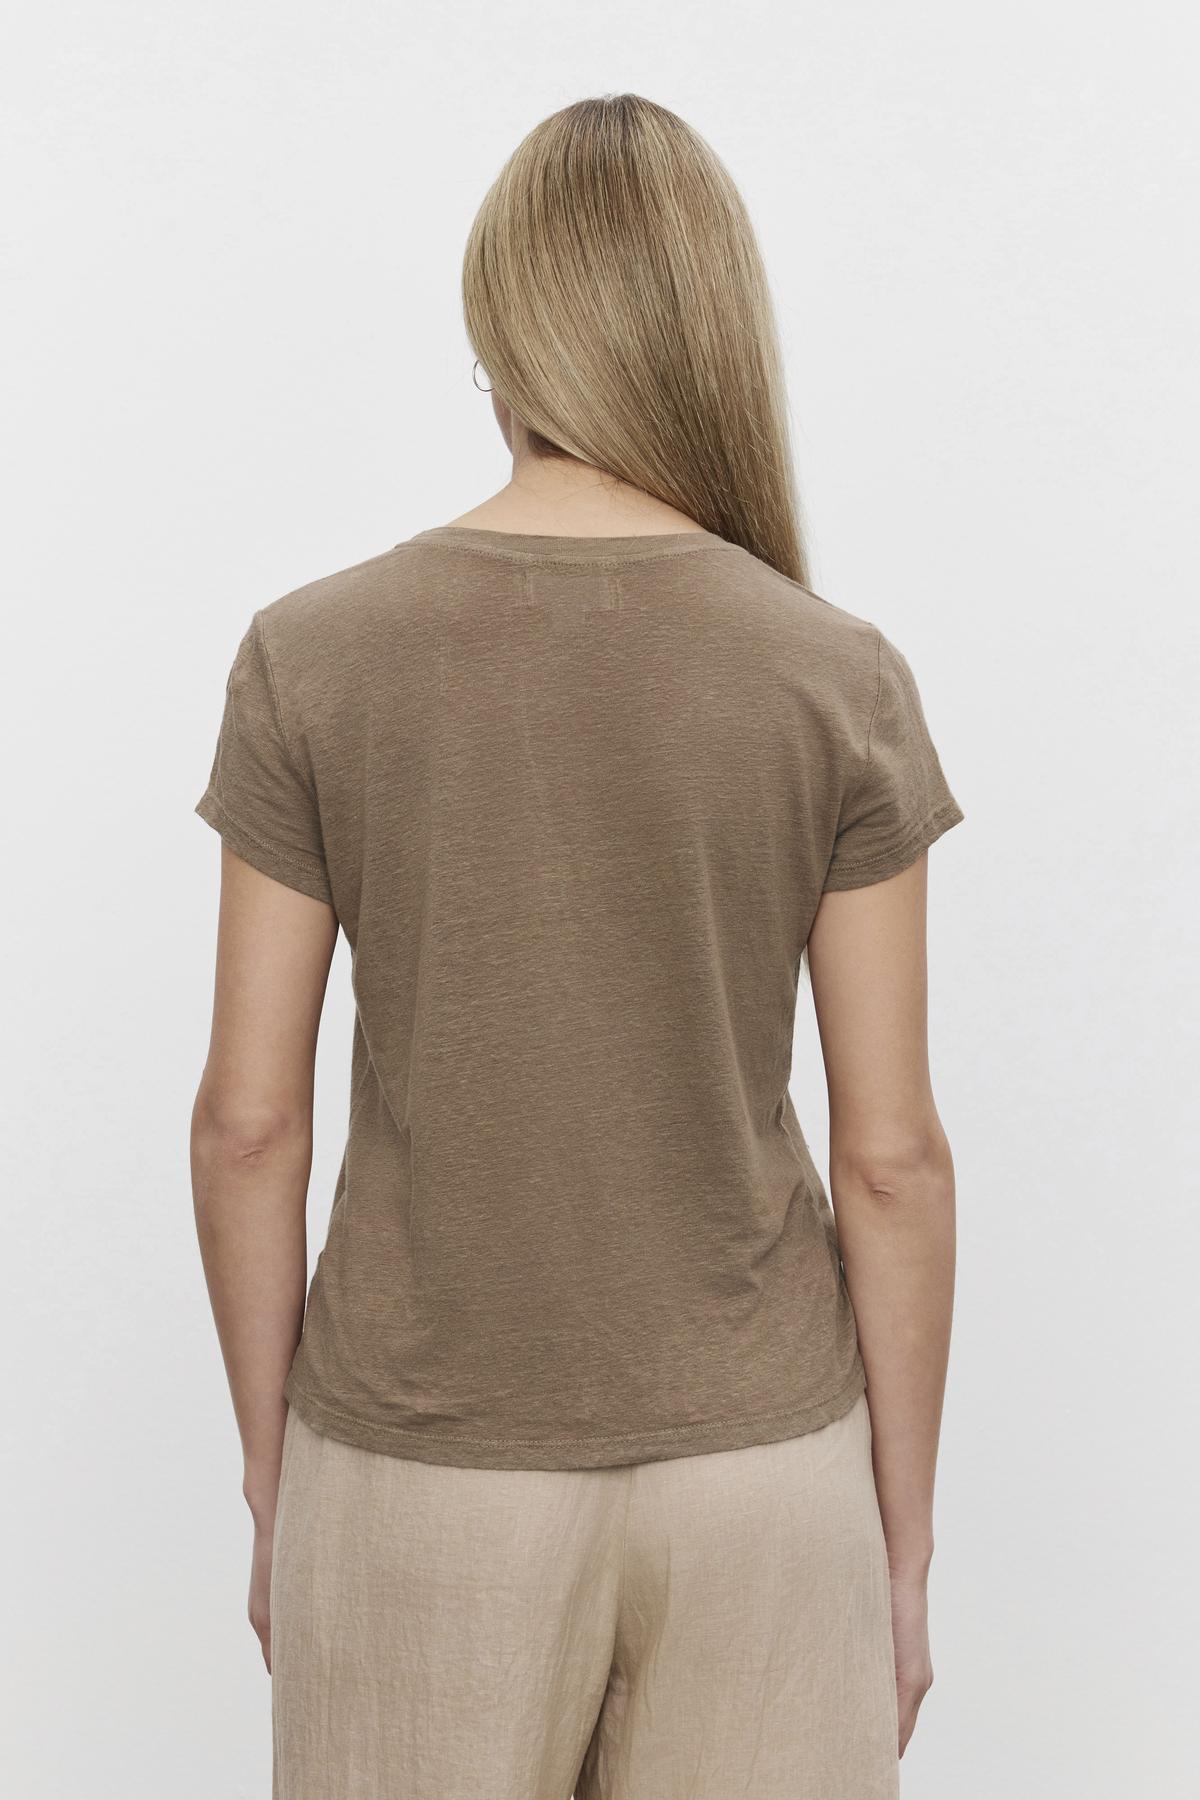 A woman seen from behind, wearing a Velvet by Graham & Spencer CASEY LINEN KNIT CREW NECK TEE with a hi-lo hemline and beige pants.-36443548025025